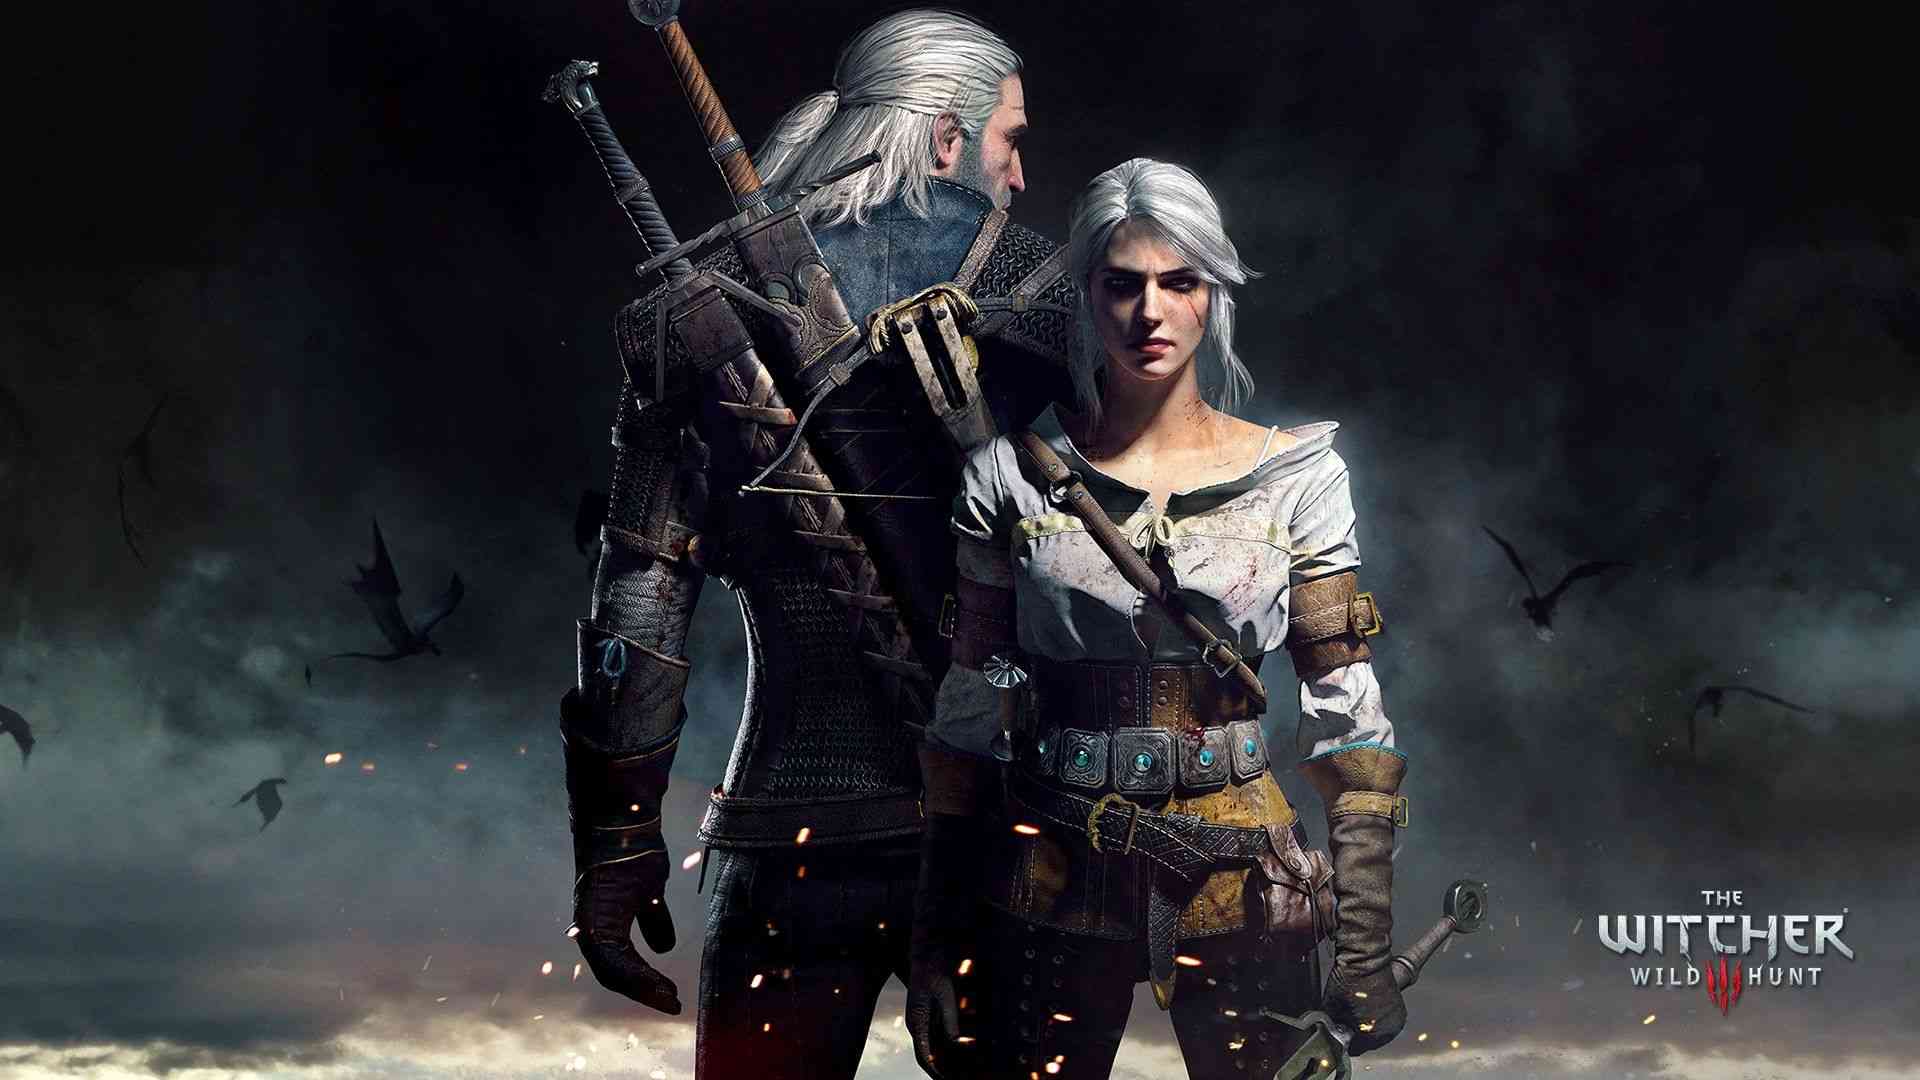 the witcher 3 xbox game pass release date leaked 3518 big 1